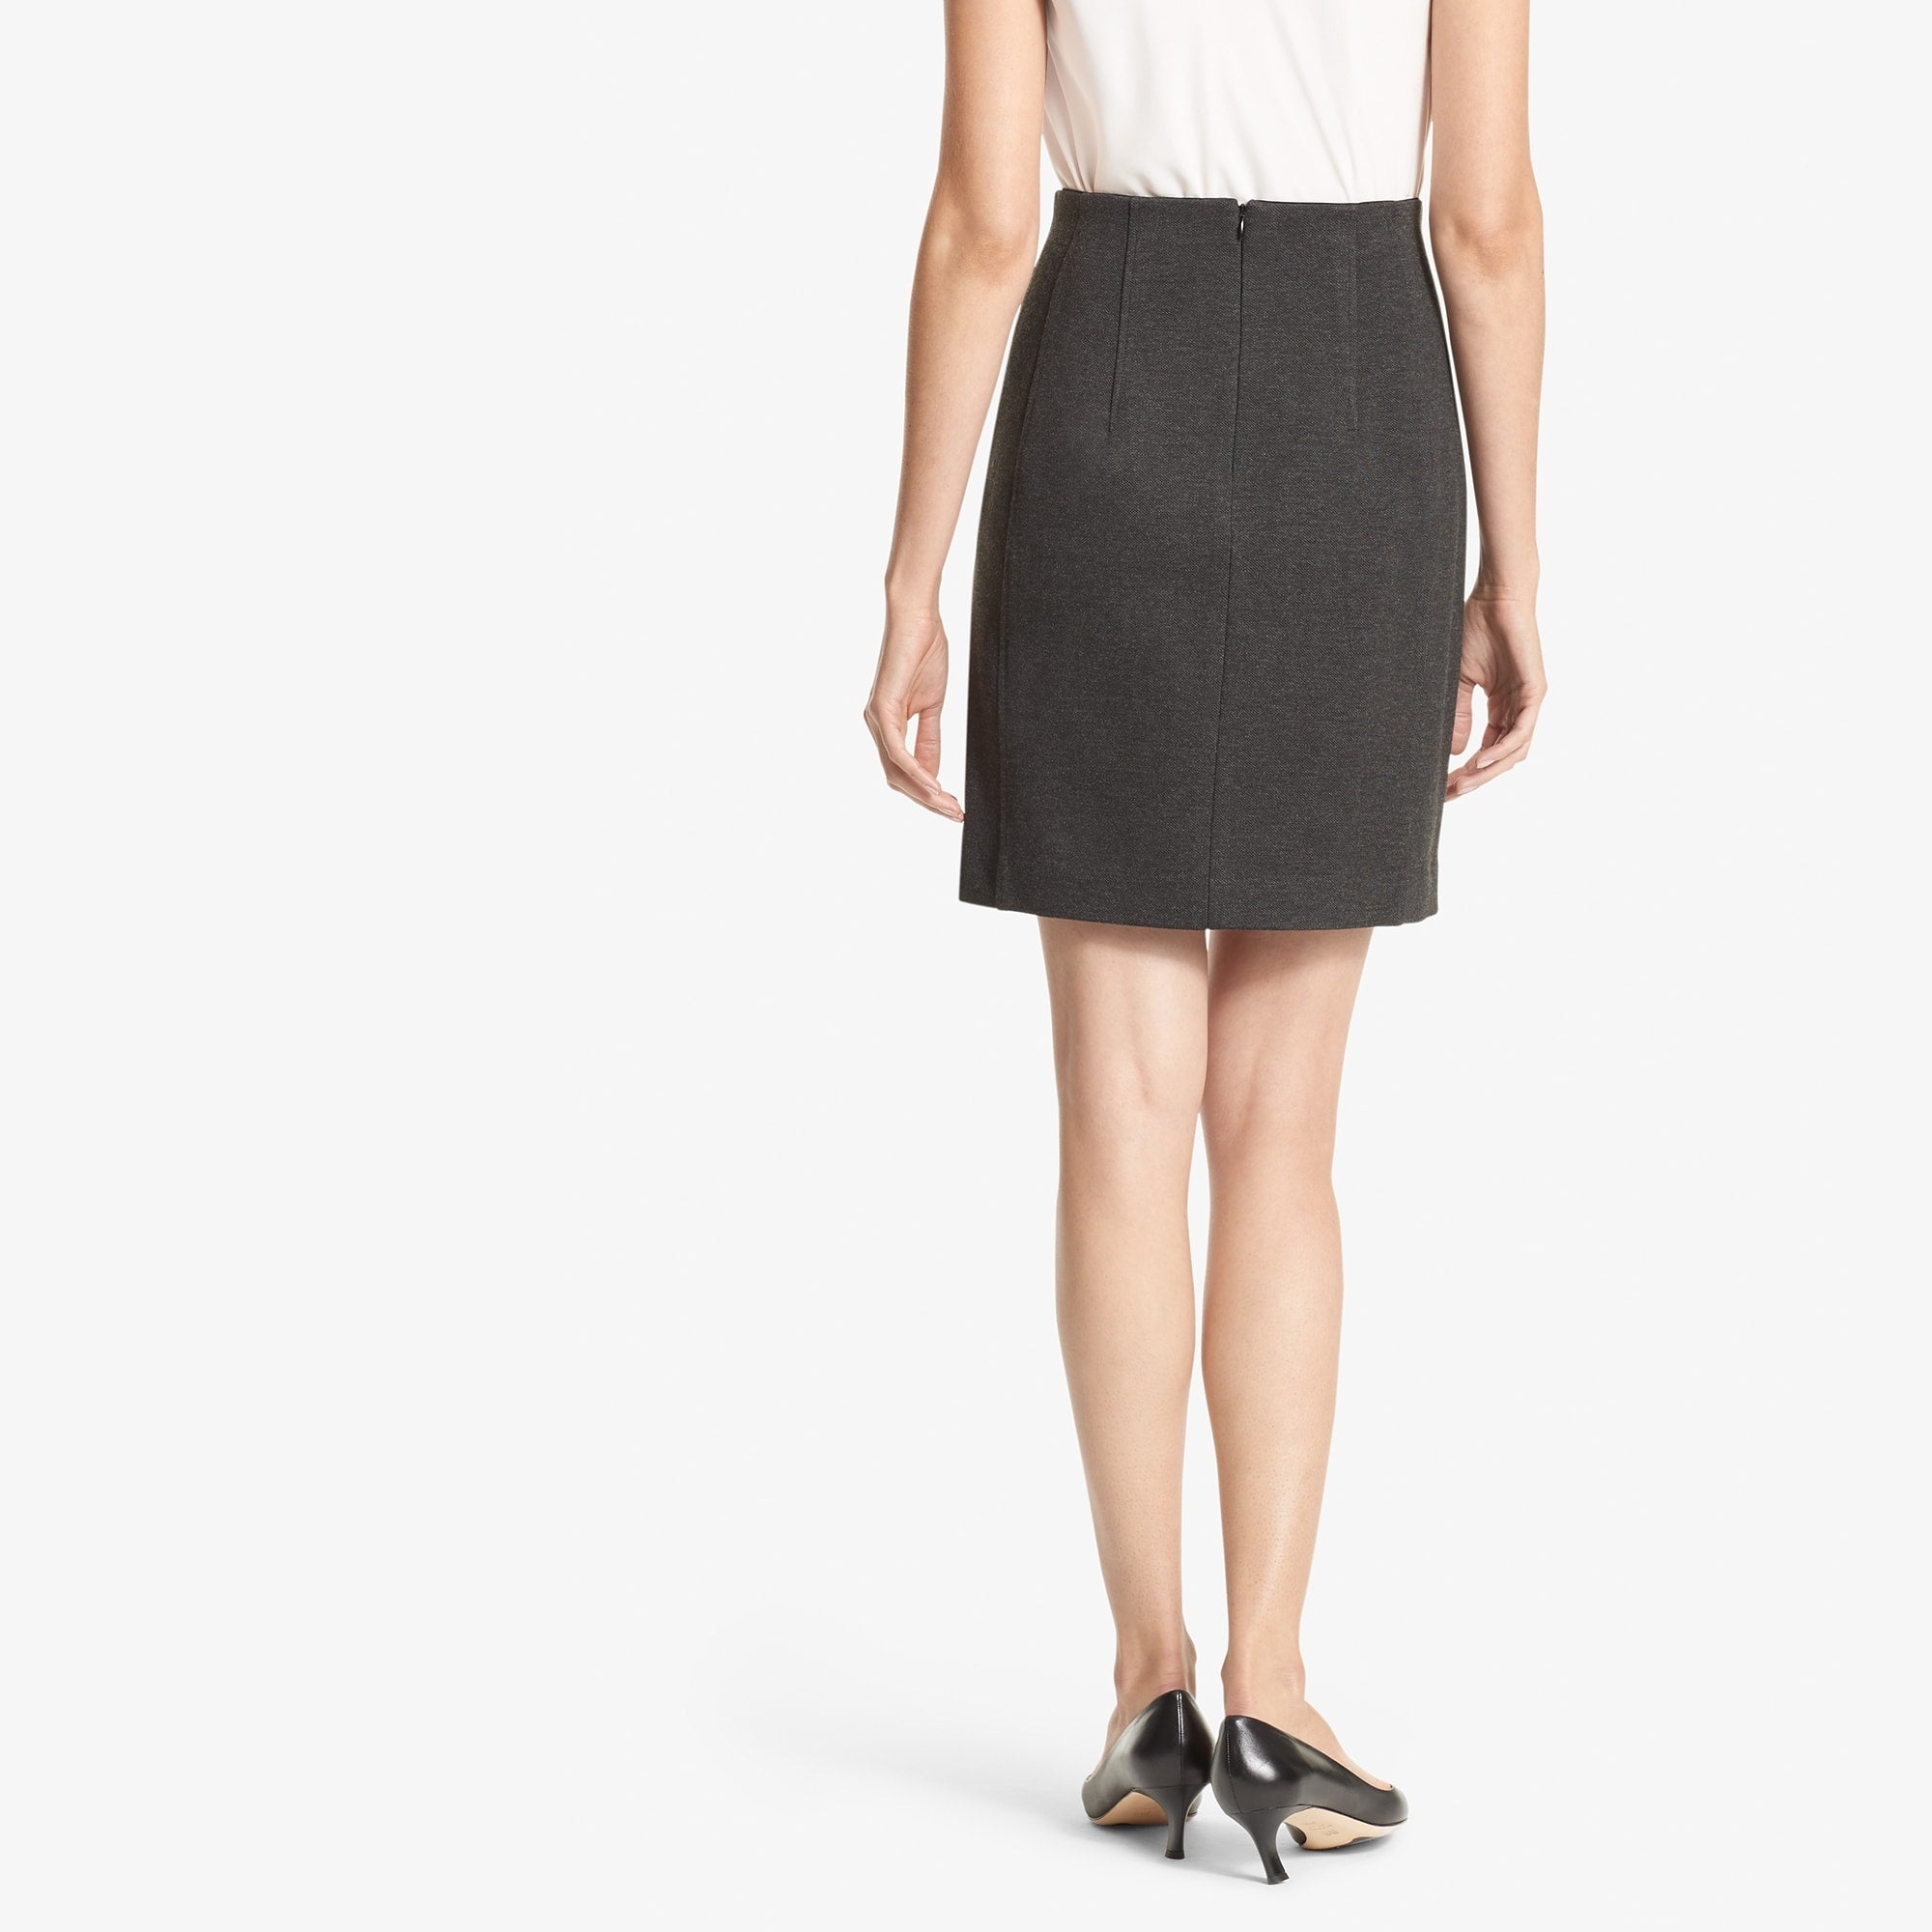 Back image of a woman standing wearing the Crosby skirt textured ponte in Charcoal